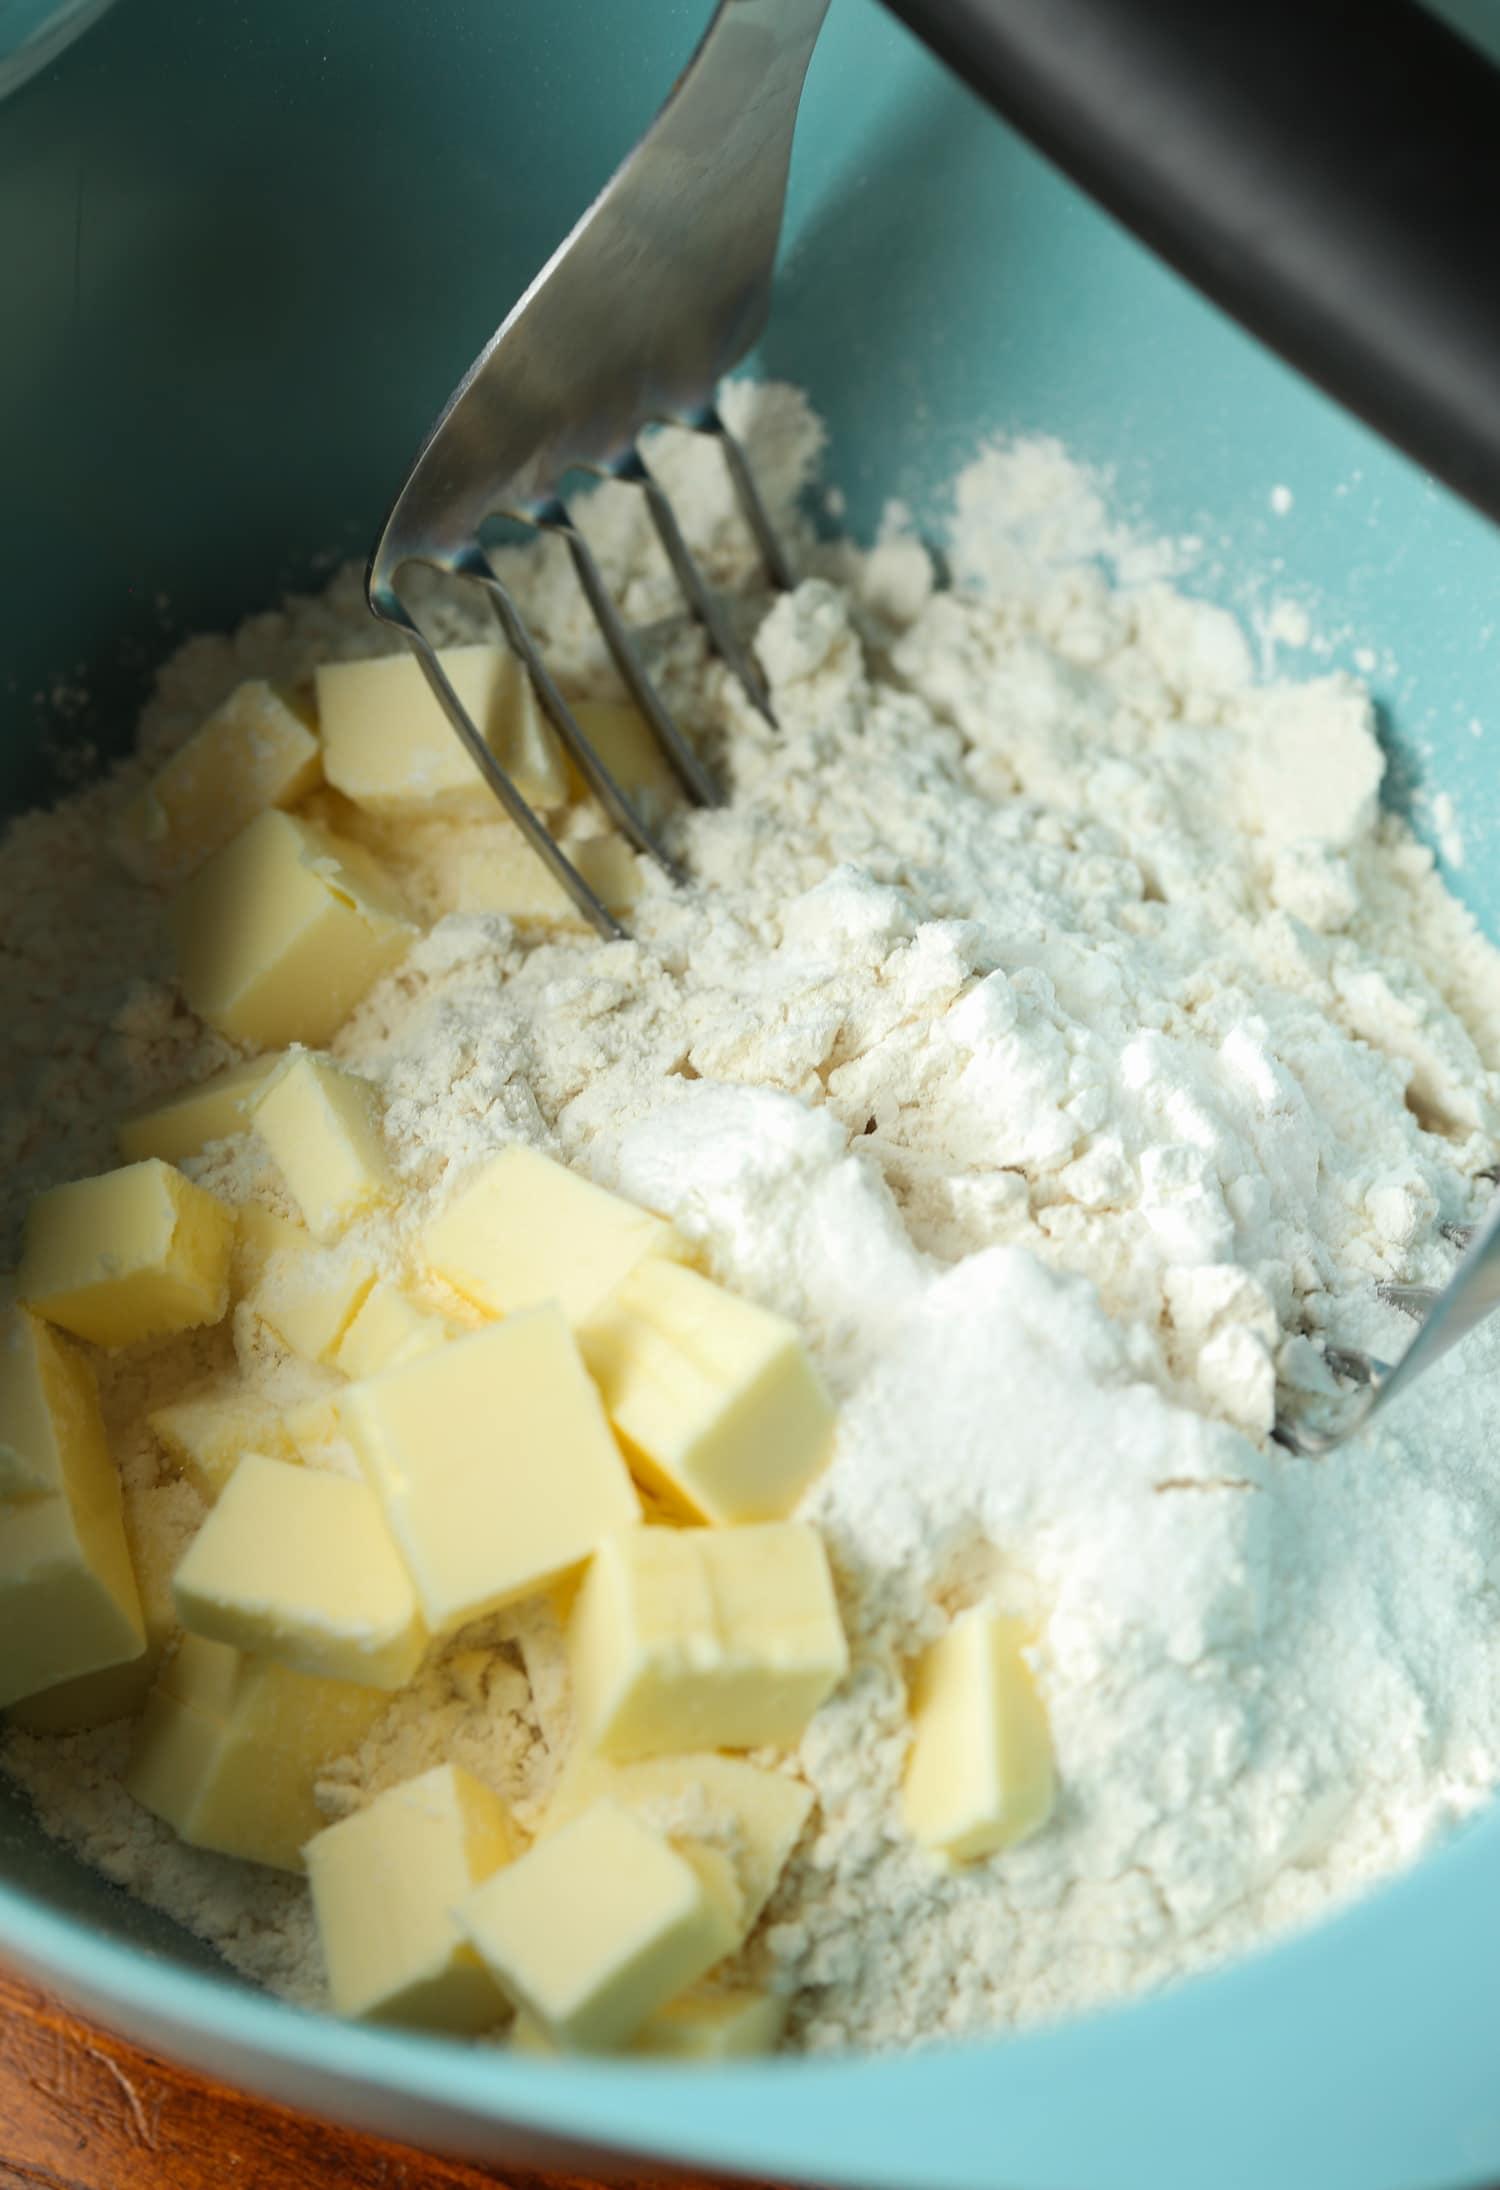 Cutting butter into dry ingredients for biscuits